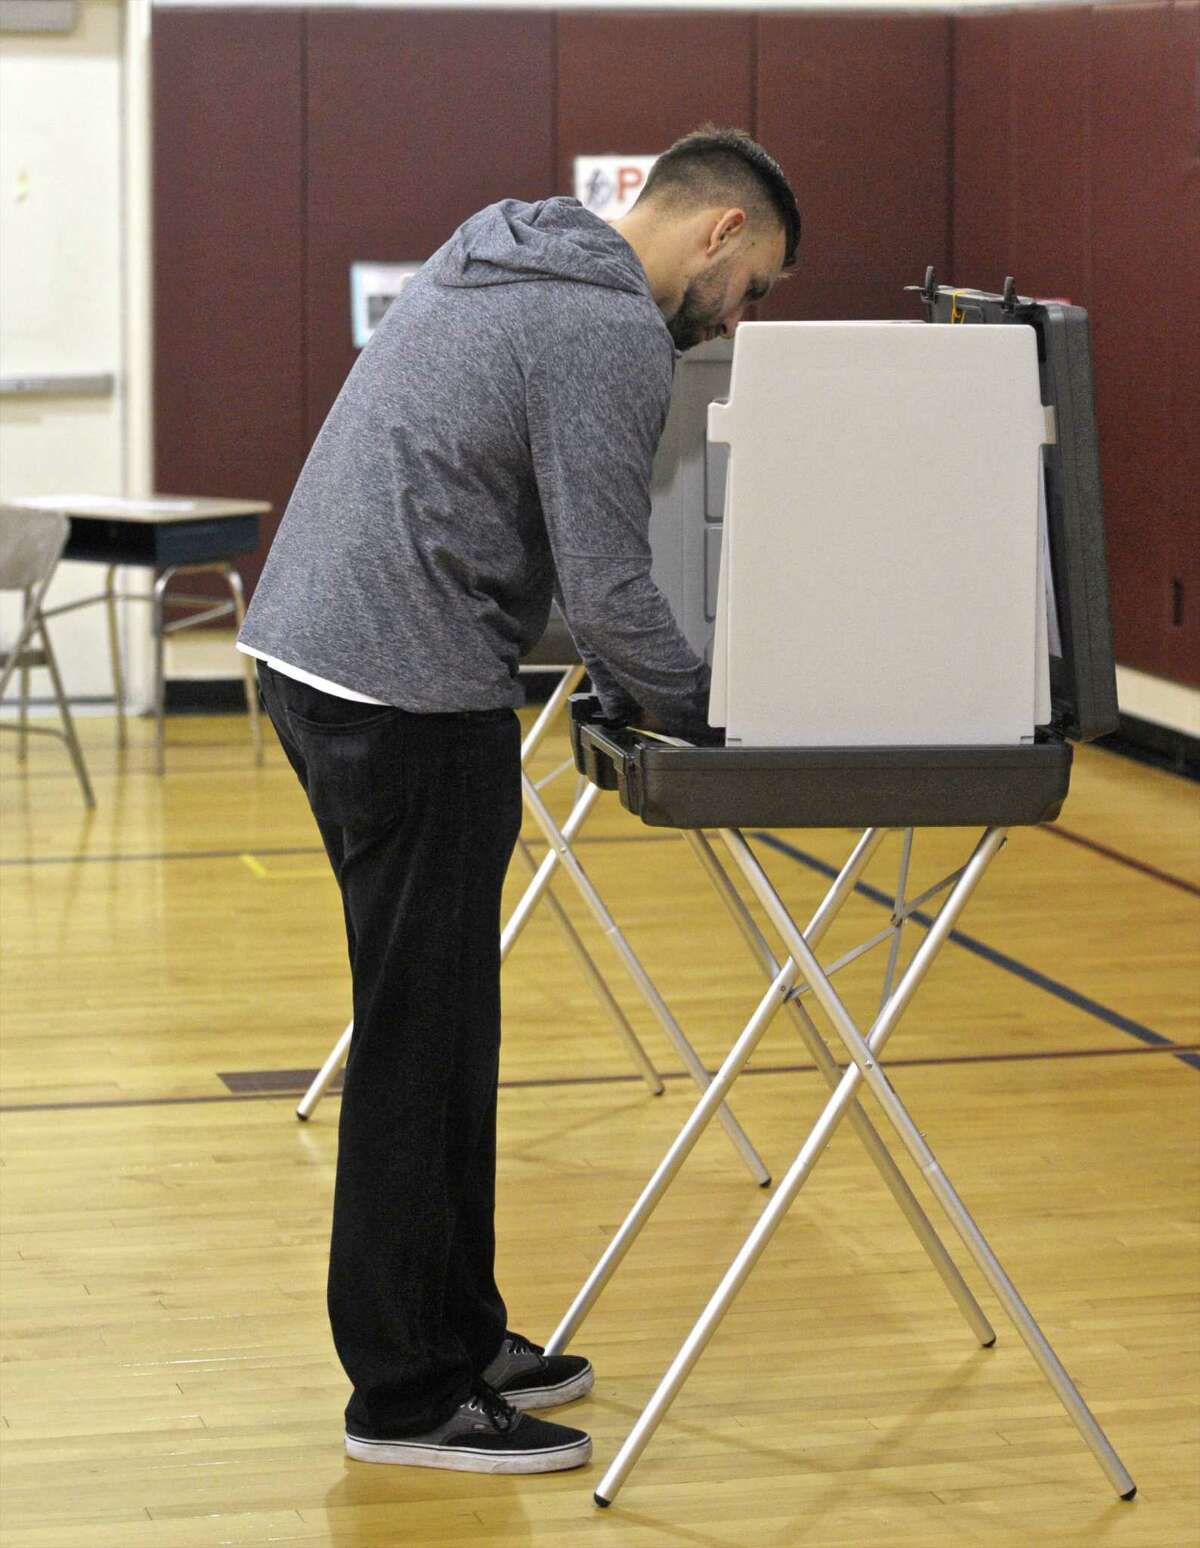 Matt Barnes, of Bethel, votes at the Berry School polling site on the referendum for the new police station in Bethel. Voters went to the polls to decide on the $13.5 million plan for a new police station. Thursday, December 17, 2015, in Bethel, Conn.